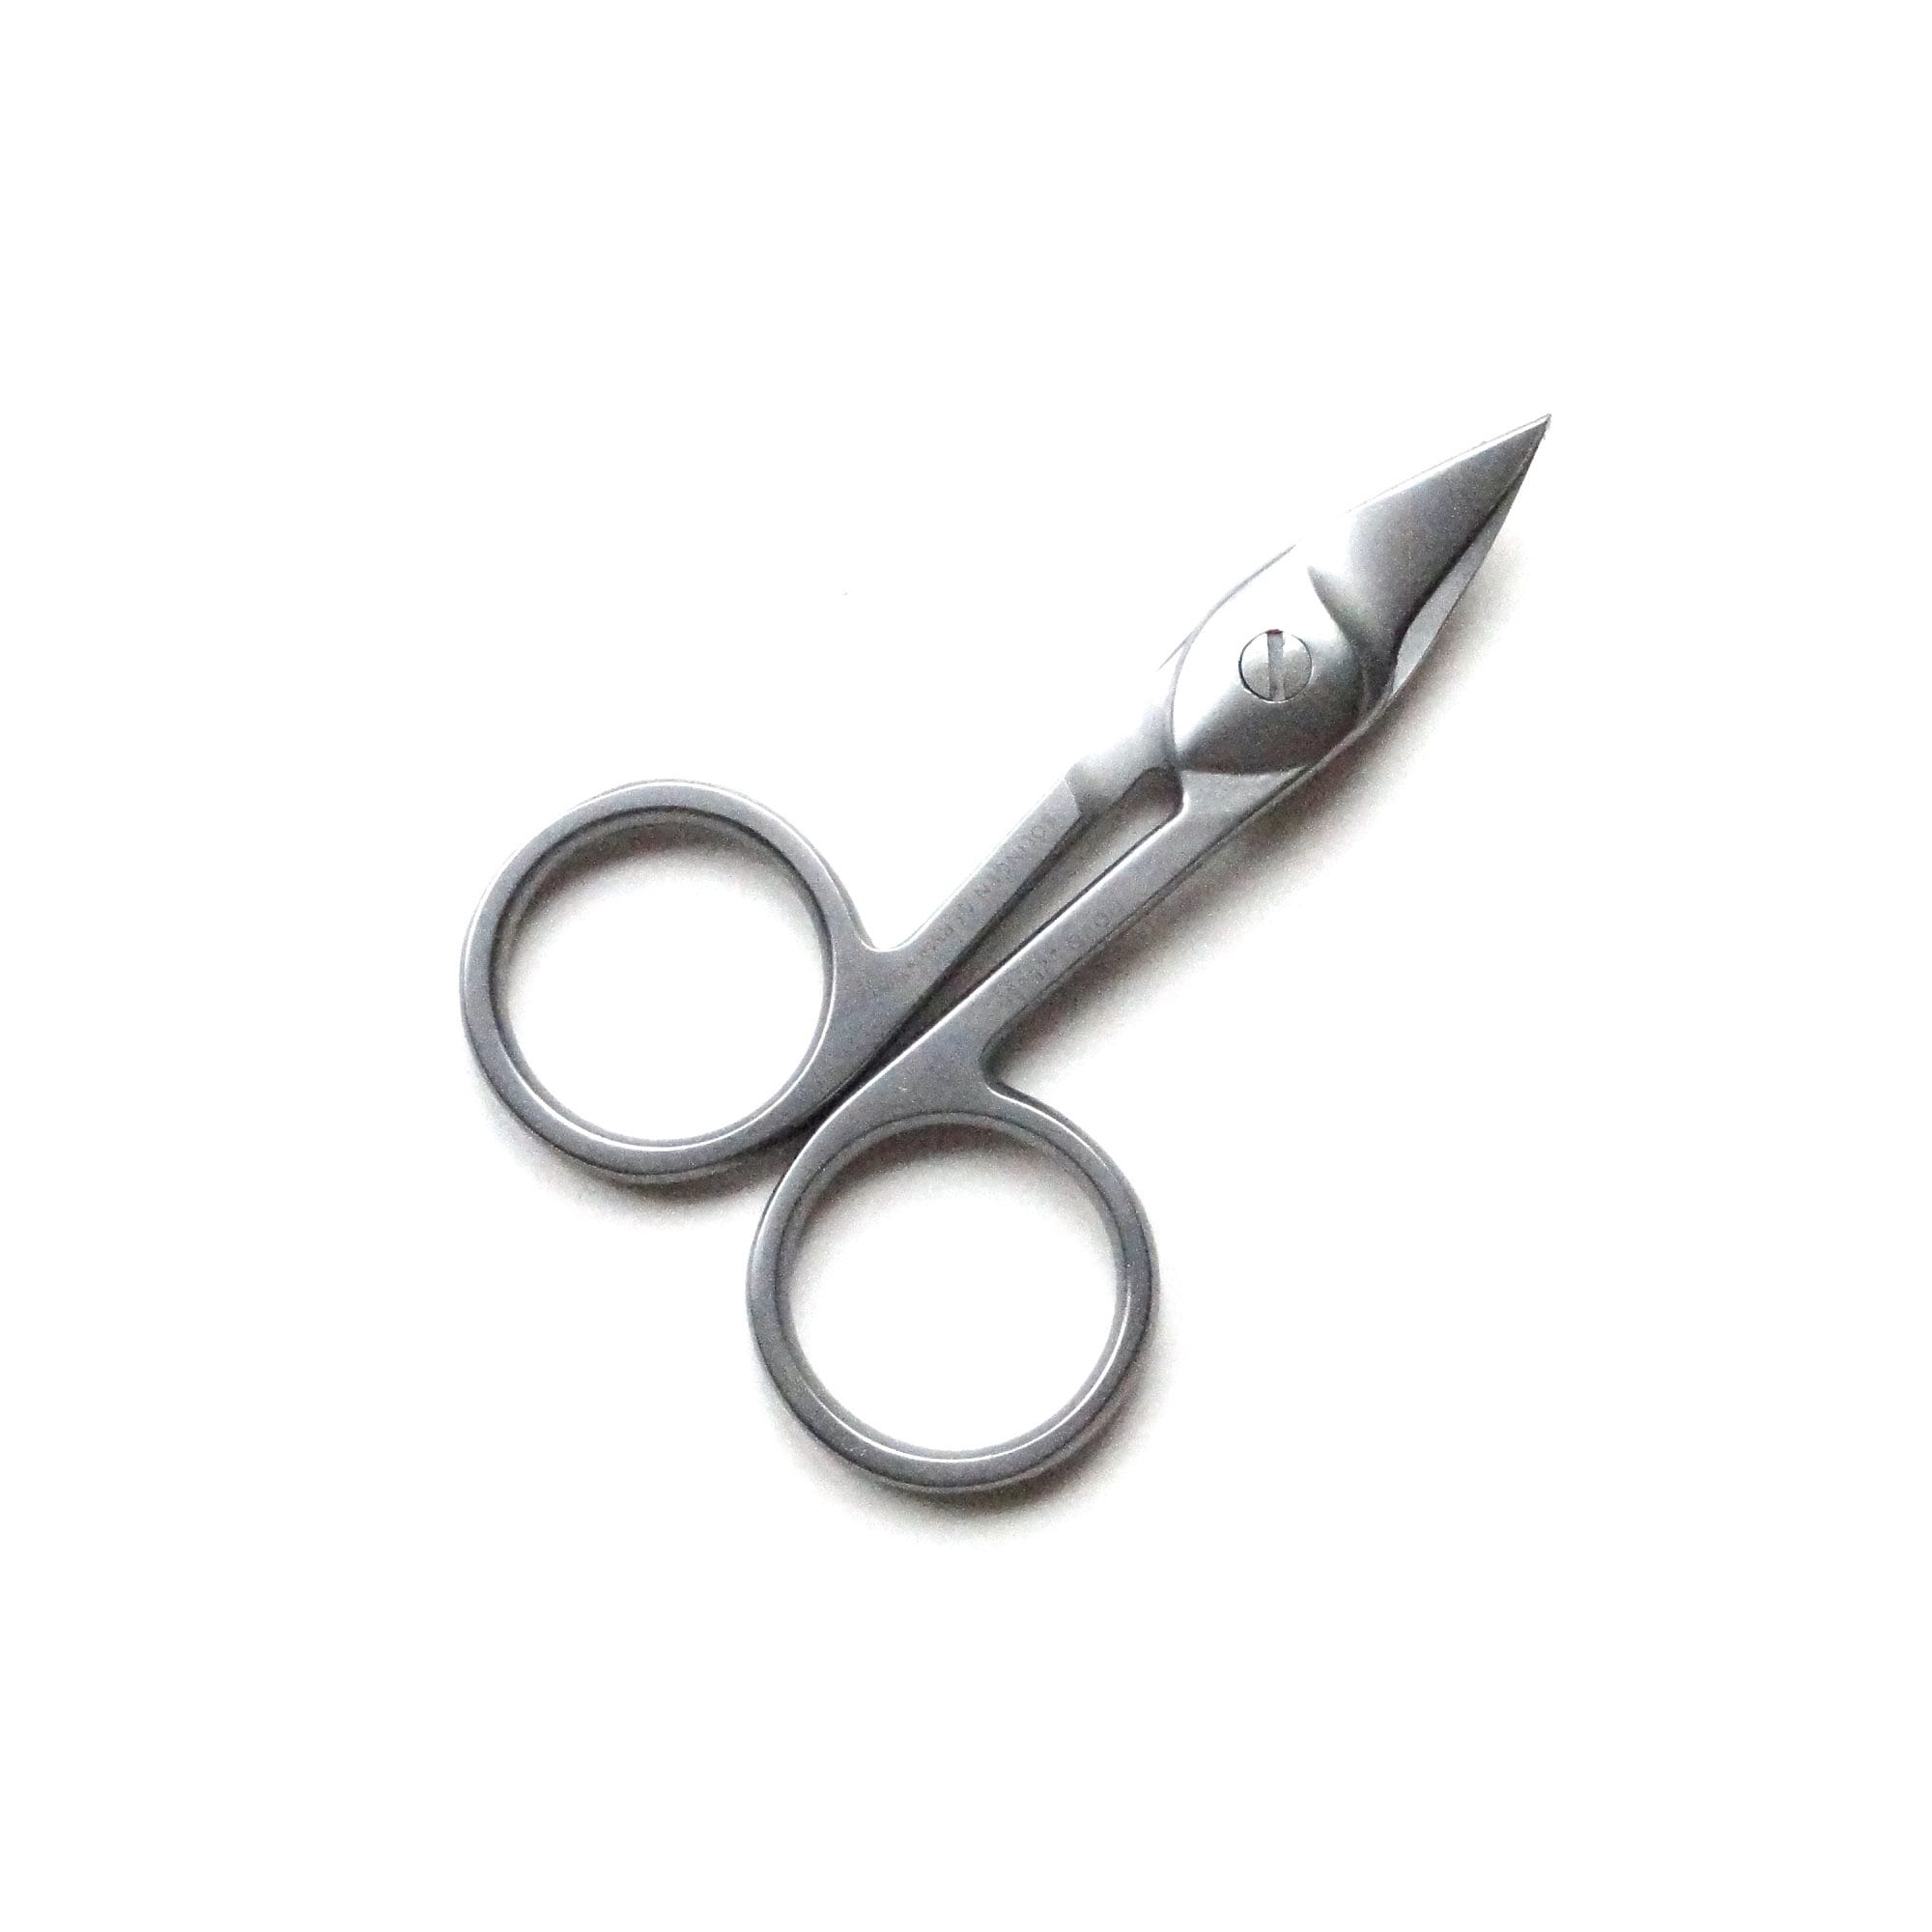 Self Opening Scissors - Discontinued